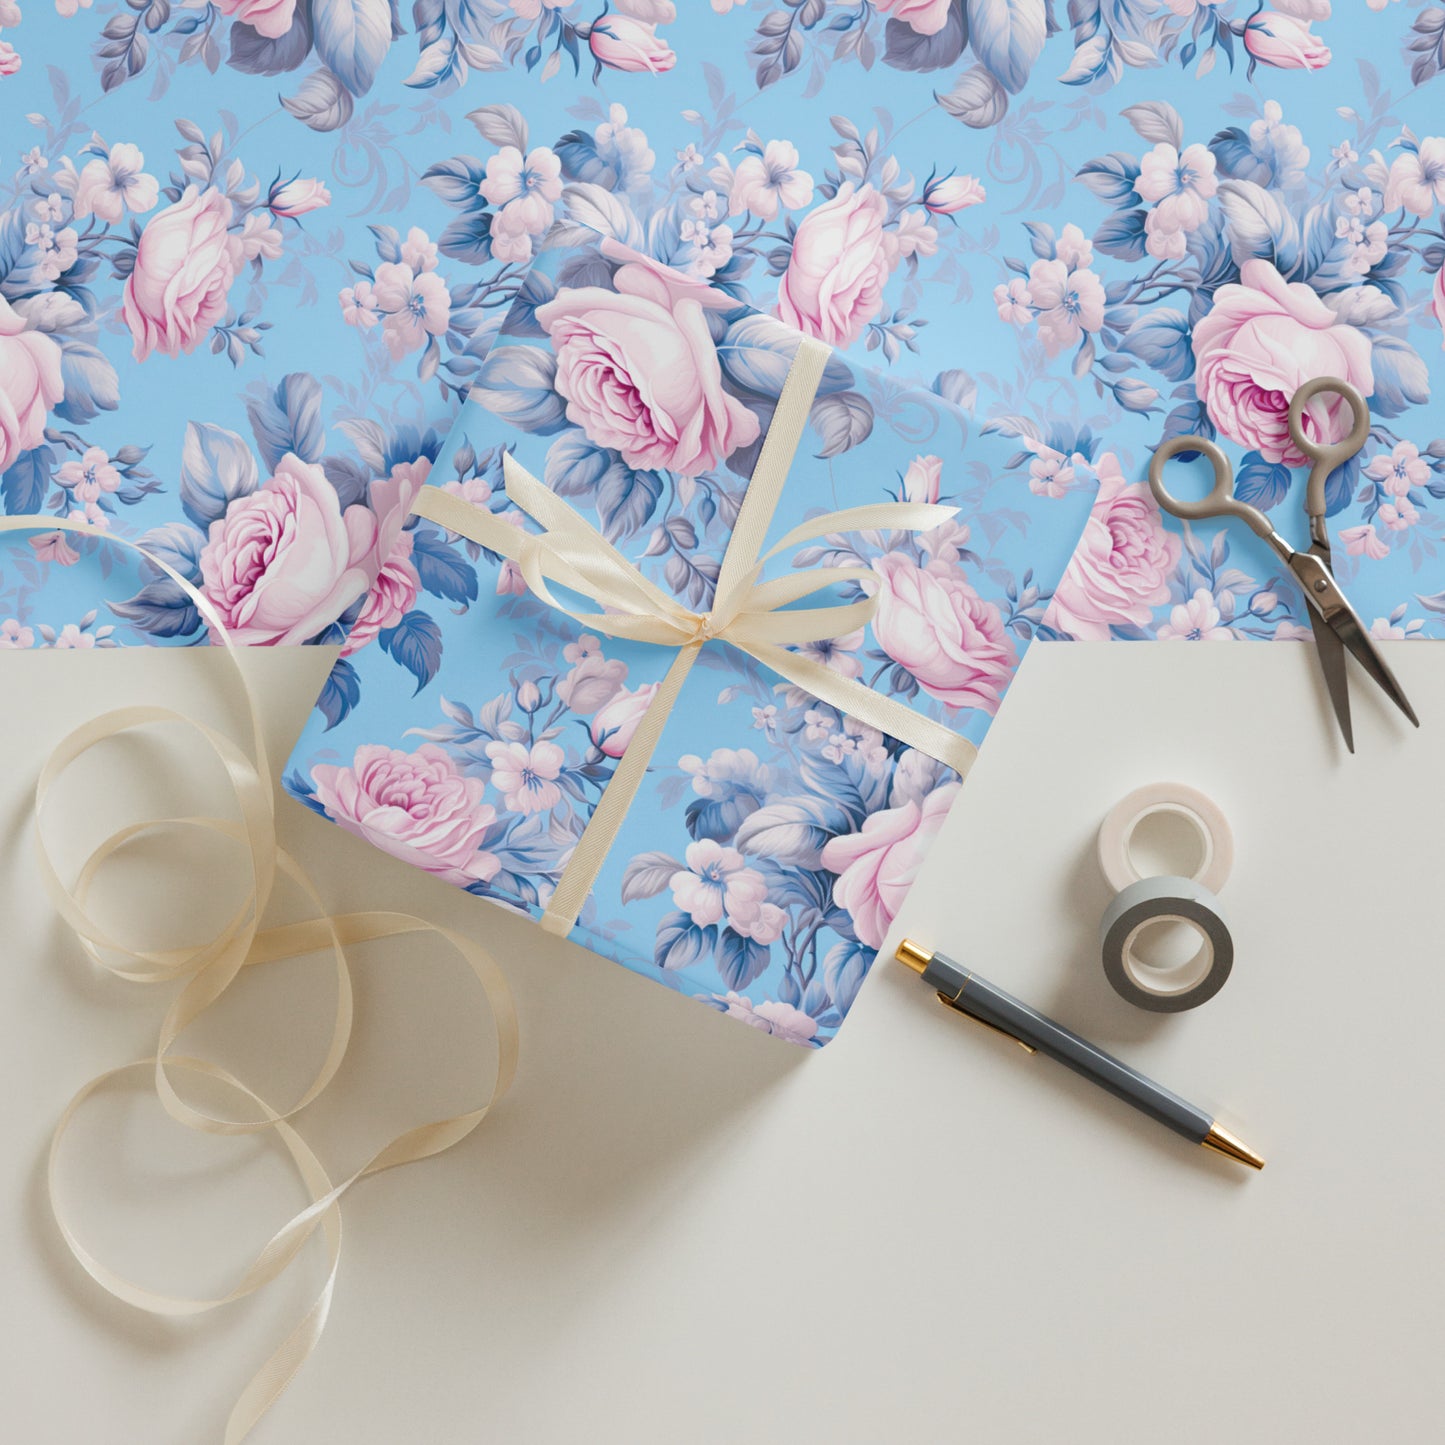 Gift Wrapping Paper Sheets: Victorian Romance Collection in Isolde